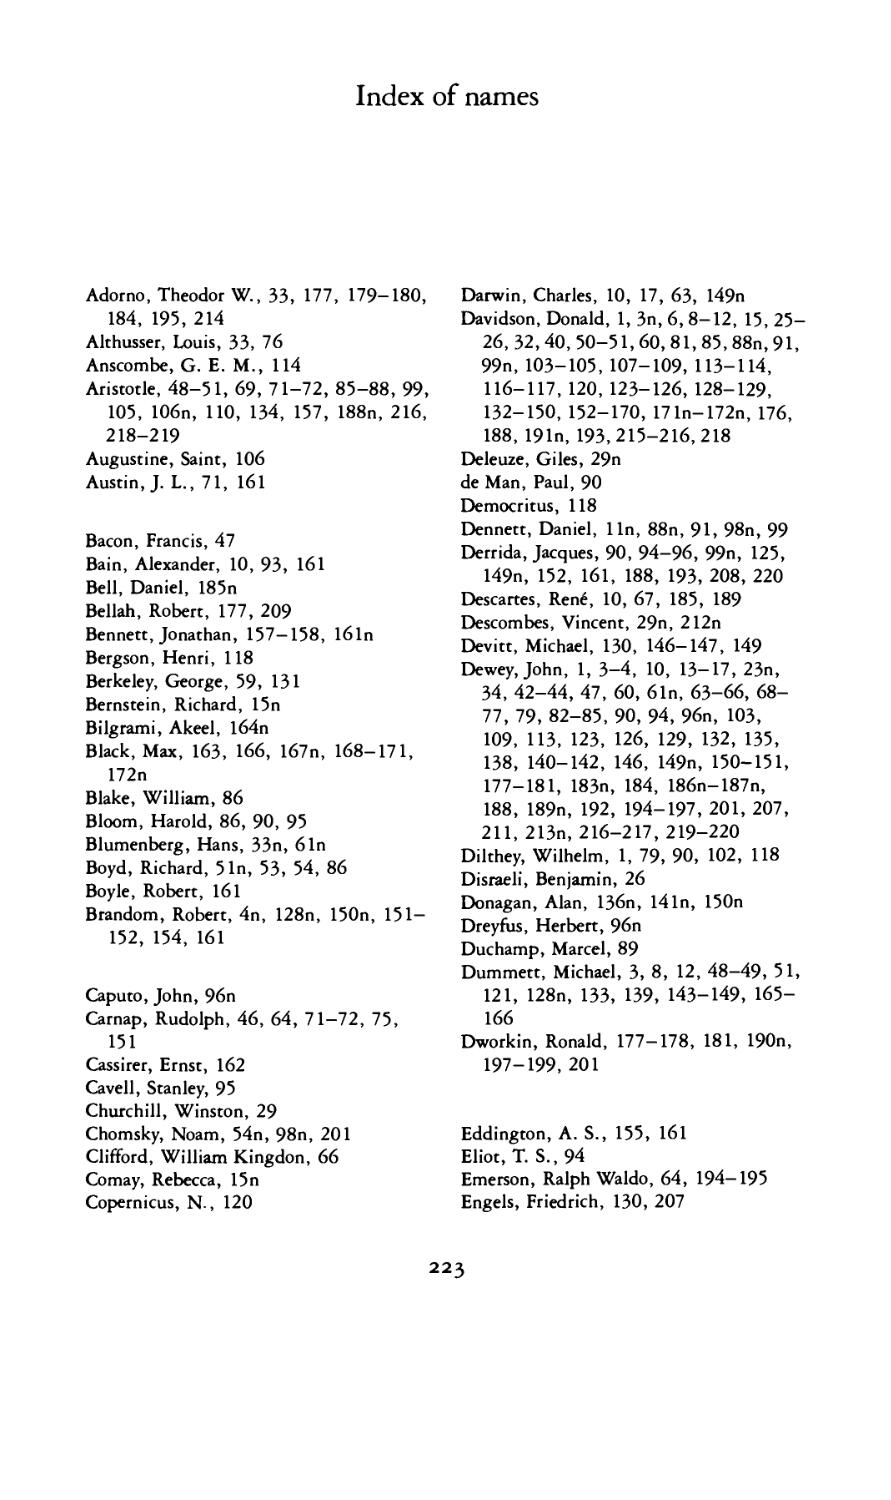 Index of names